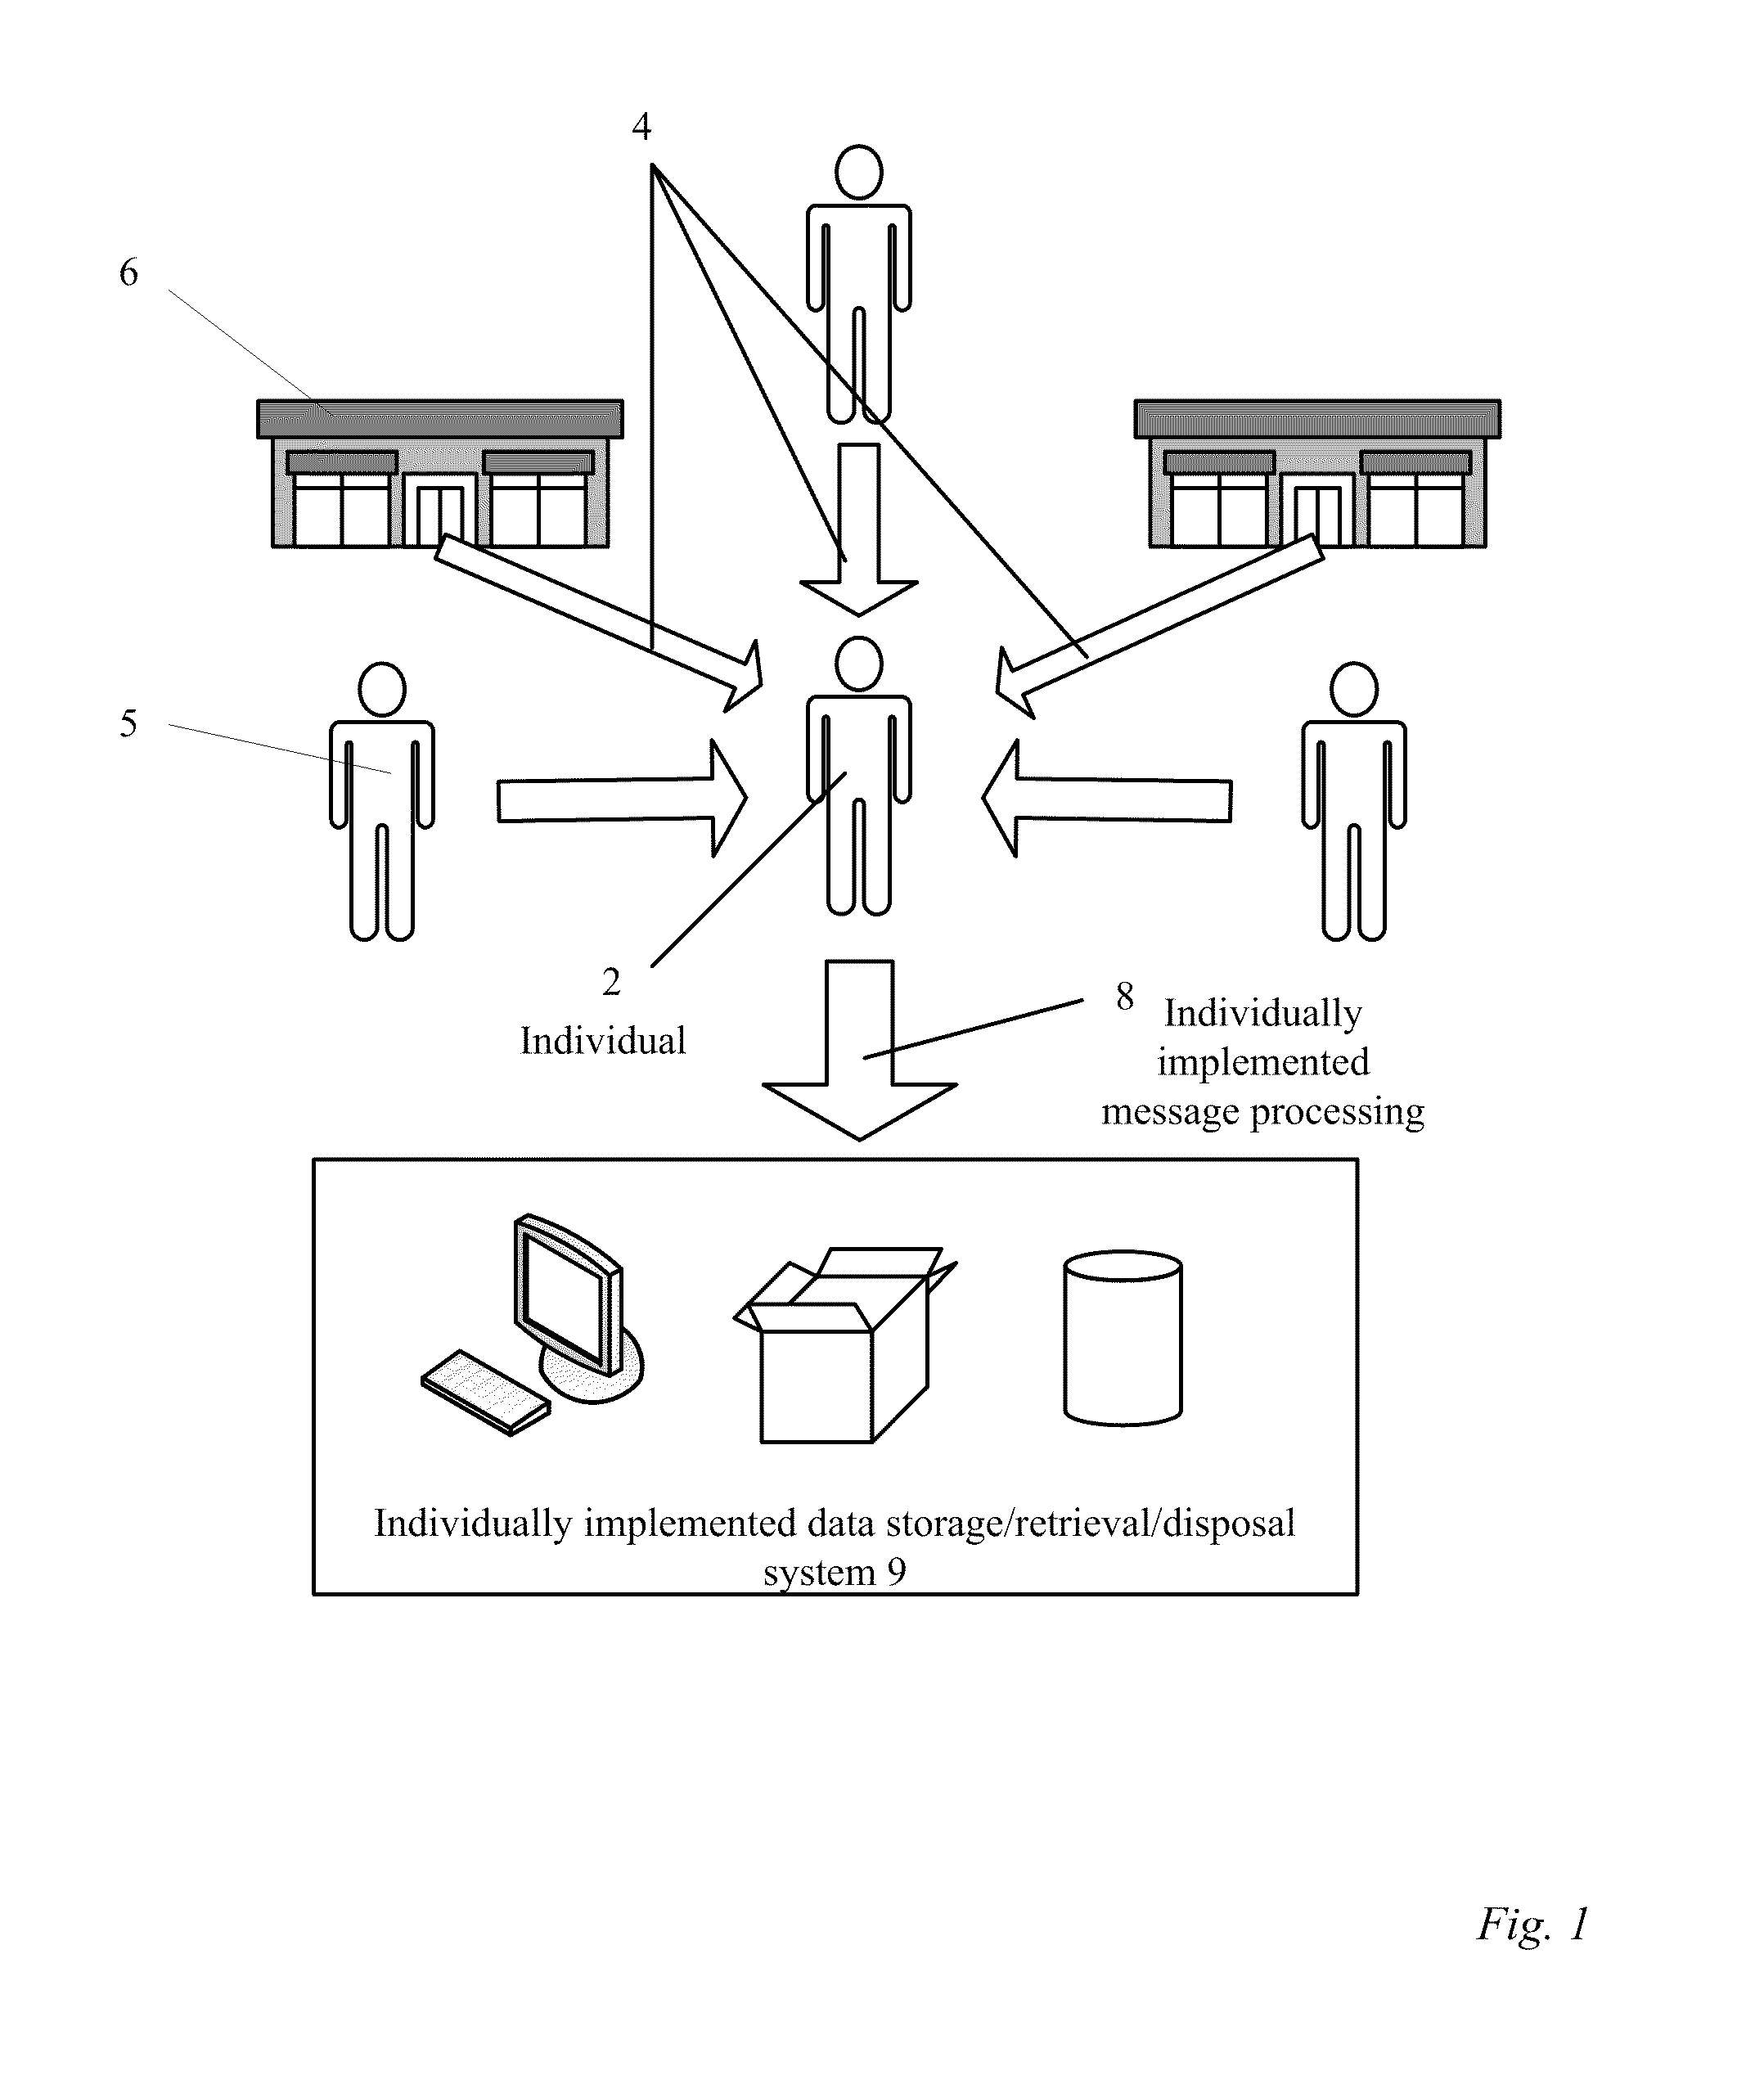 Methods and apparatus for a financial document clearinghouse and secure delivery network